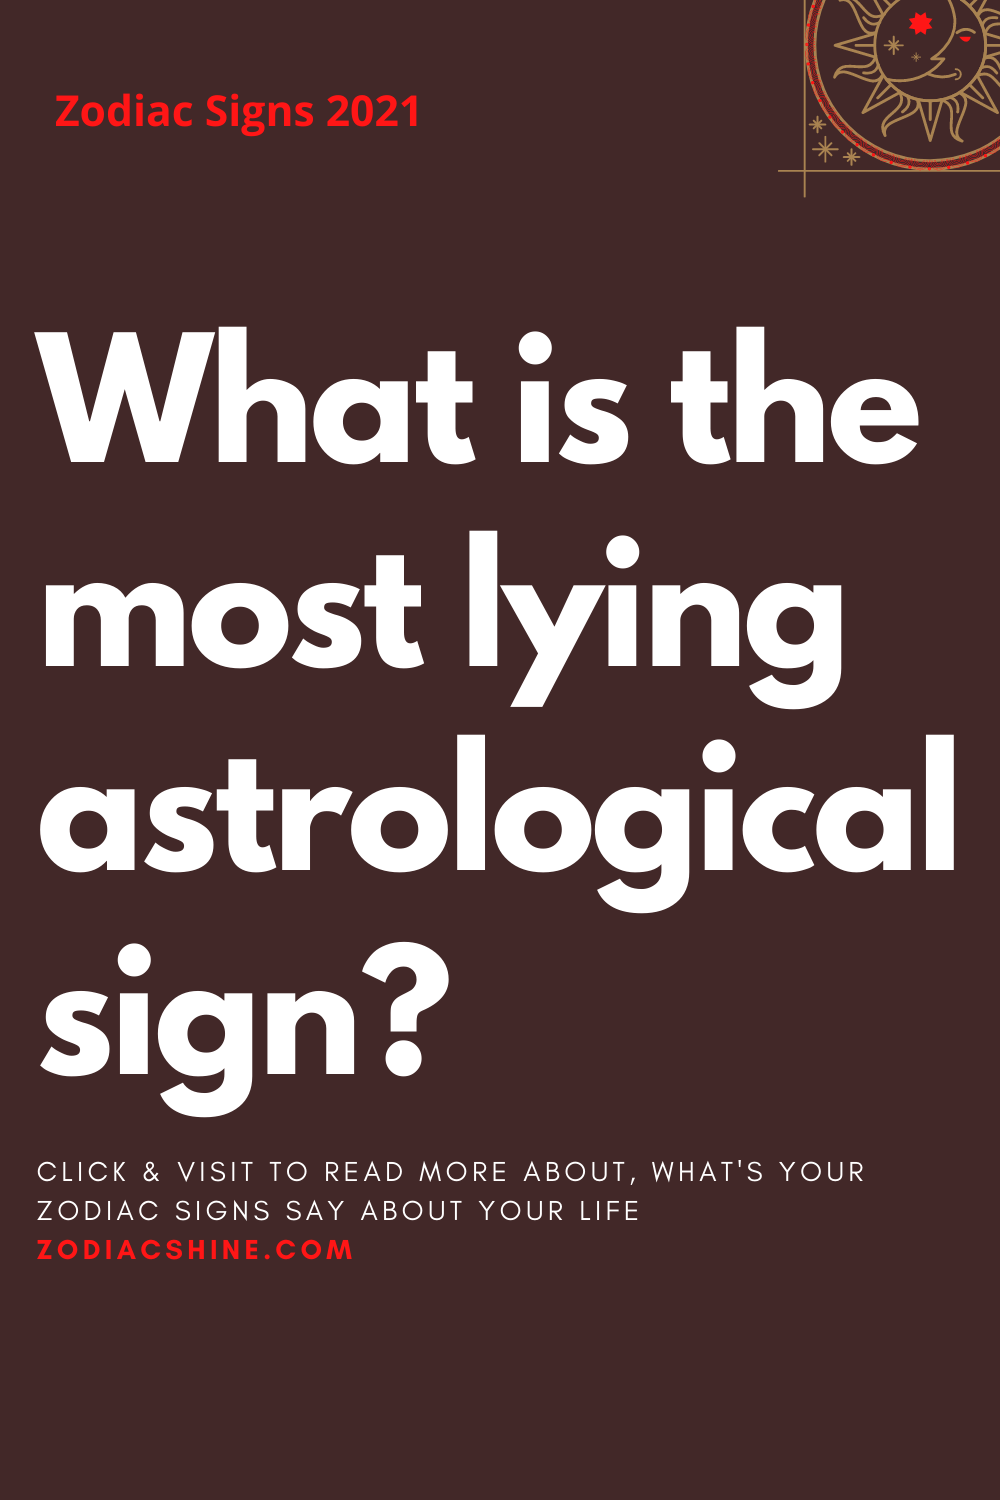 What is the most lying astrological sign?